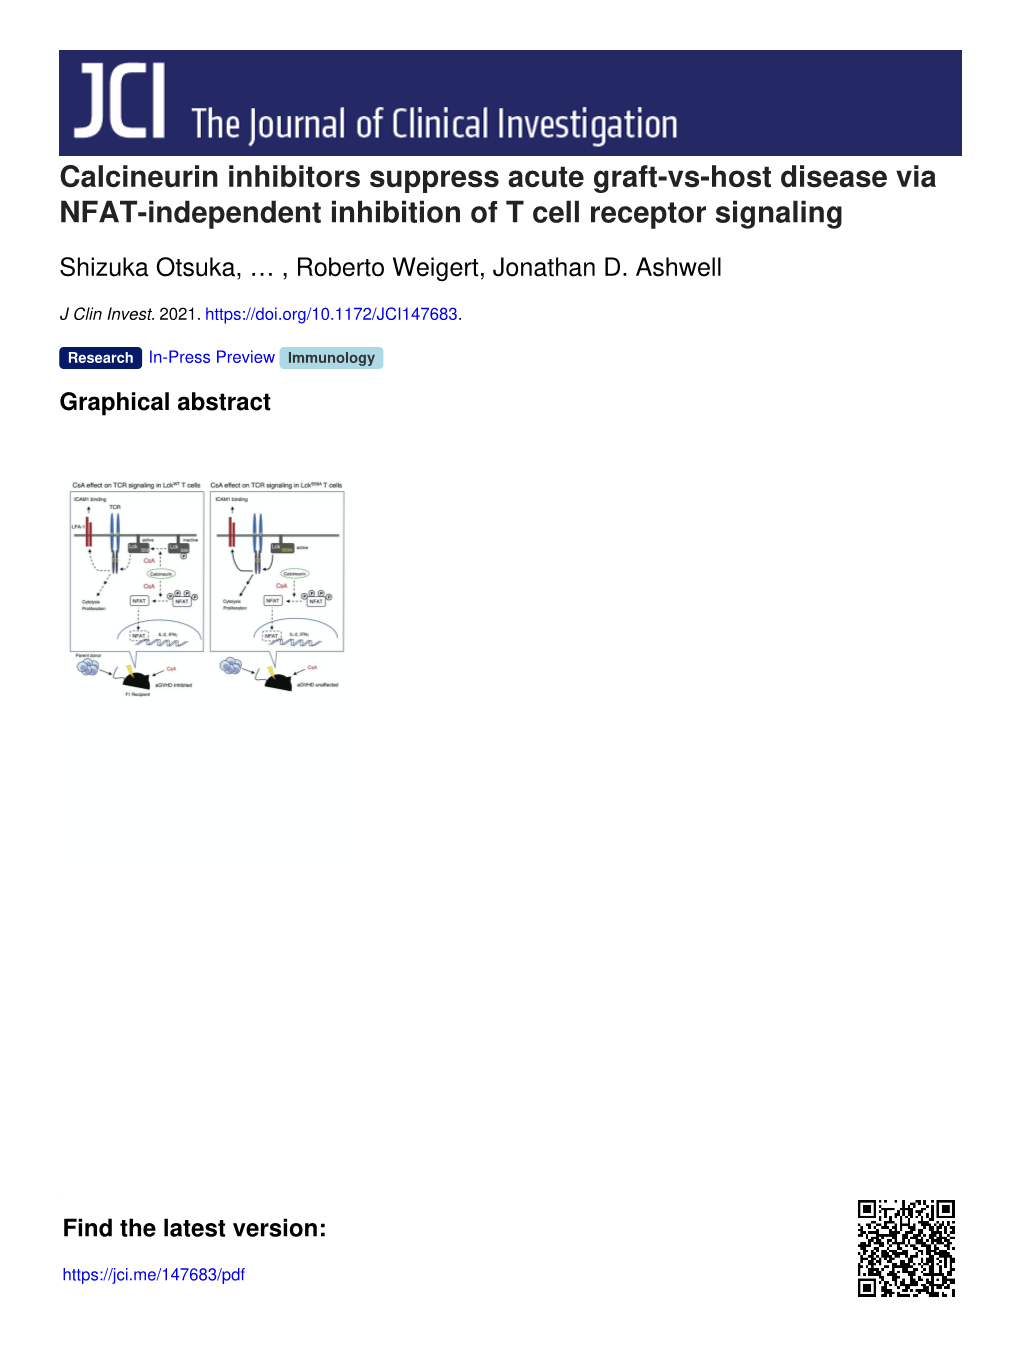 Calcineurin Inhibitors Suppress Acute Graft-Vs-Host Disease Via NFAT-Independent Inhibition of T Cell Receptor Signaling